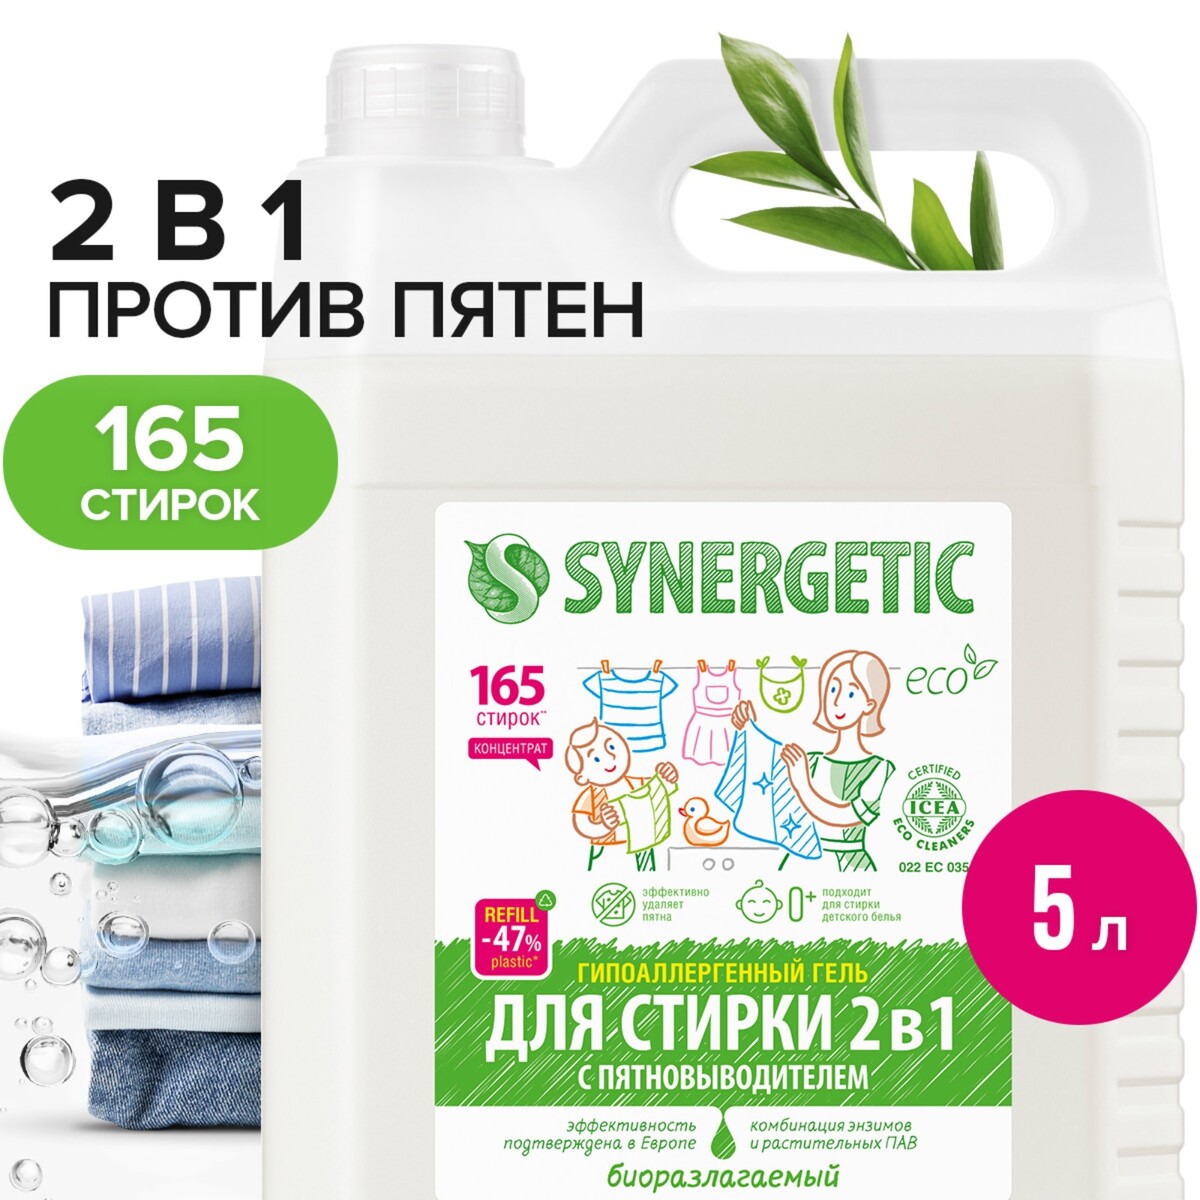     synergetic, , , 5 